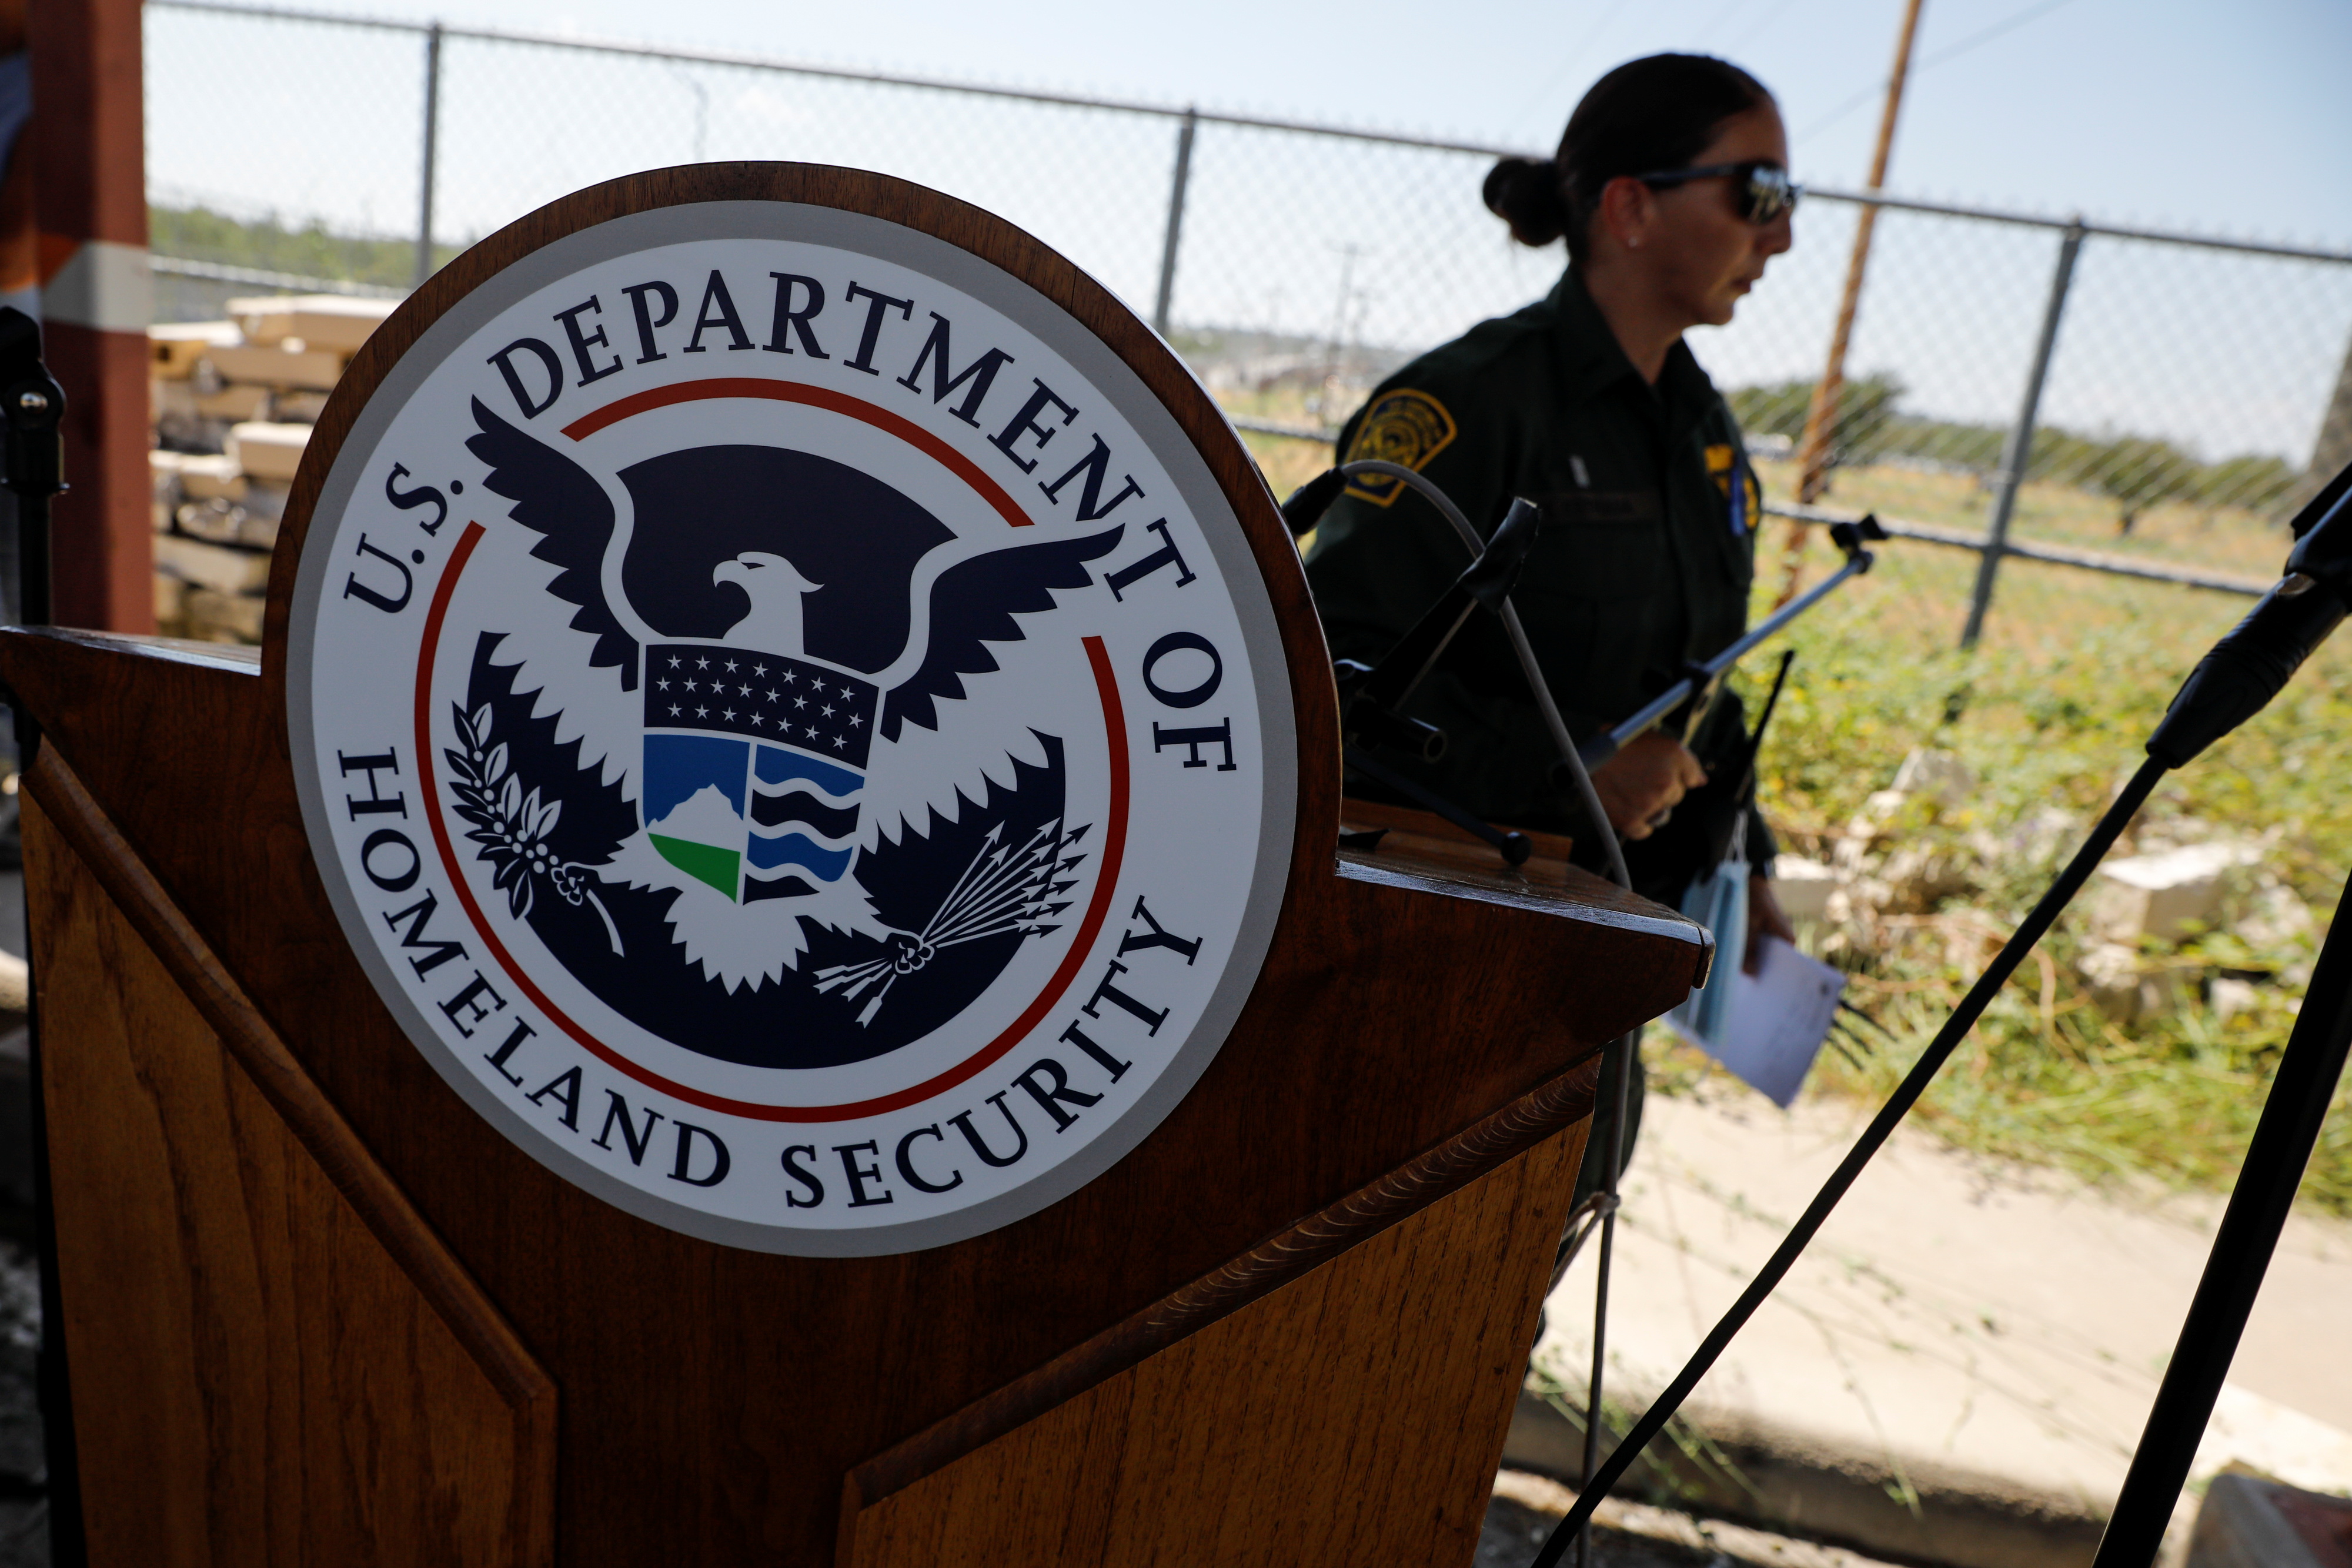 The seal of the U.S. Department of Homeland Security is seen after a news conference near the International Bridge between Mexico and the U.S., as U.S. authorities accelerate removal of migrants at border with Mexico, in Del Rio